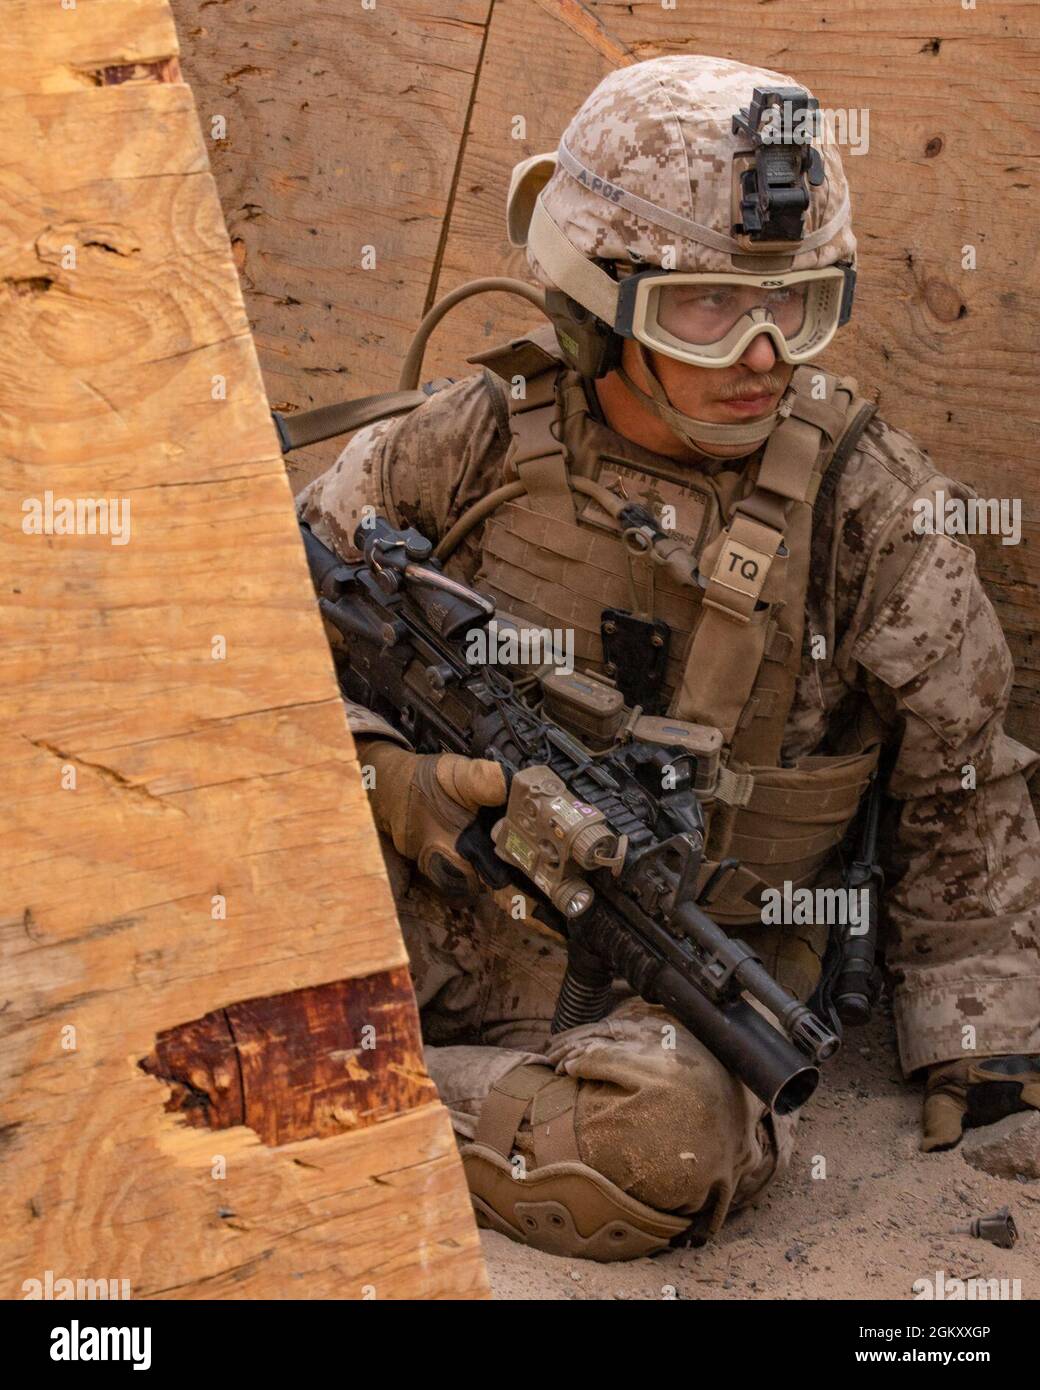 A U.S. Marine with India Company, 3rd Battalion, 25th Marines, 4th Marine Division, prepares to attack an enemy position on Range 410A during Integrated Training Exercise (ITX) 4-21 at Marine Corps Air Ground Combat Center, Twentynine Palms, California on July 22. Range 410A provides Reserve Marines the opportunity to execute a fire and maneuver attack supported by mortarmen, machine gunners and combat engineers. Stock Photo